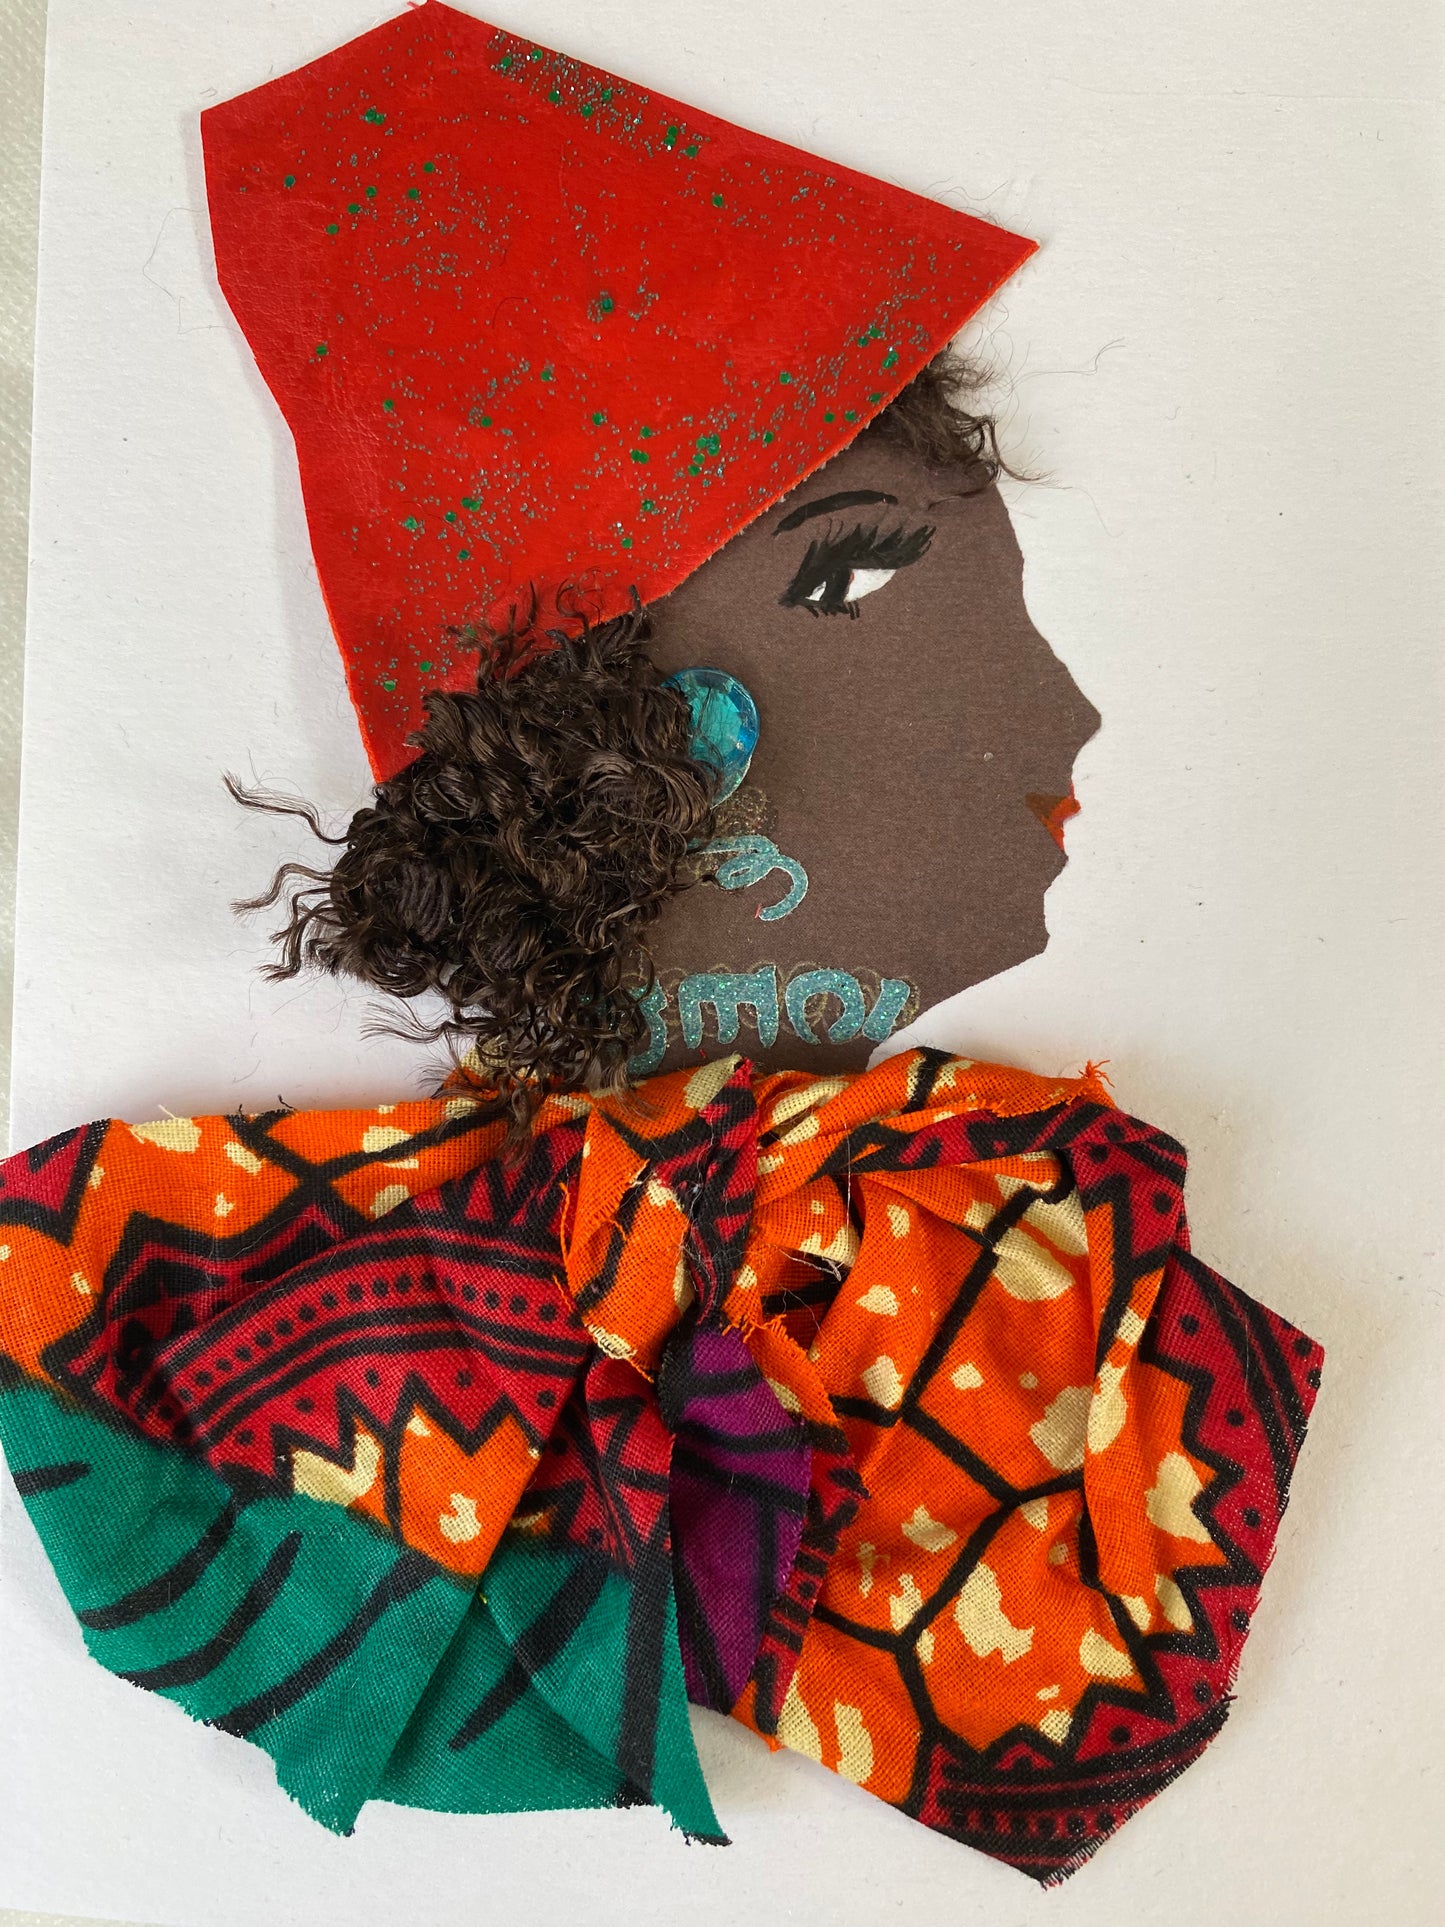 I designed this card of a black woman who is wearing a divine bright red hat with green sparkles. She wears an elegant ankara print blouse. She wears sparkly blue jewellery.  